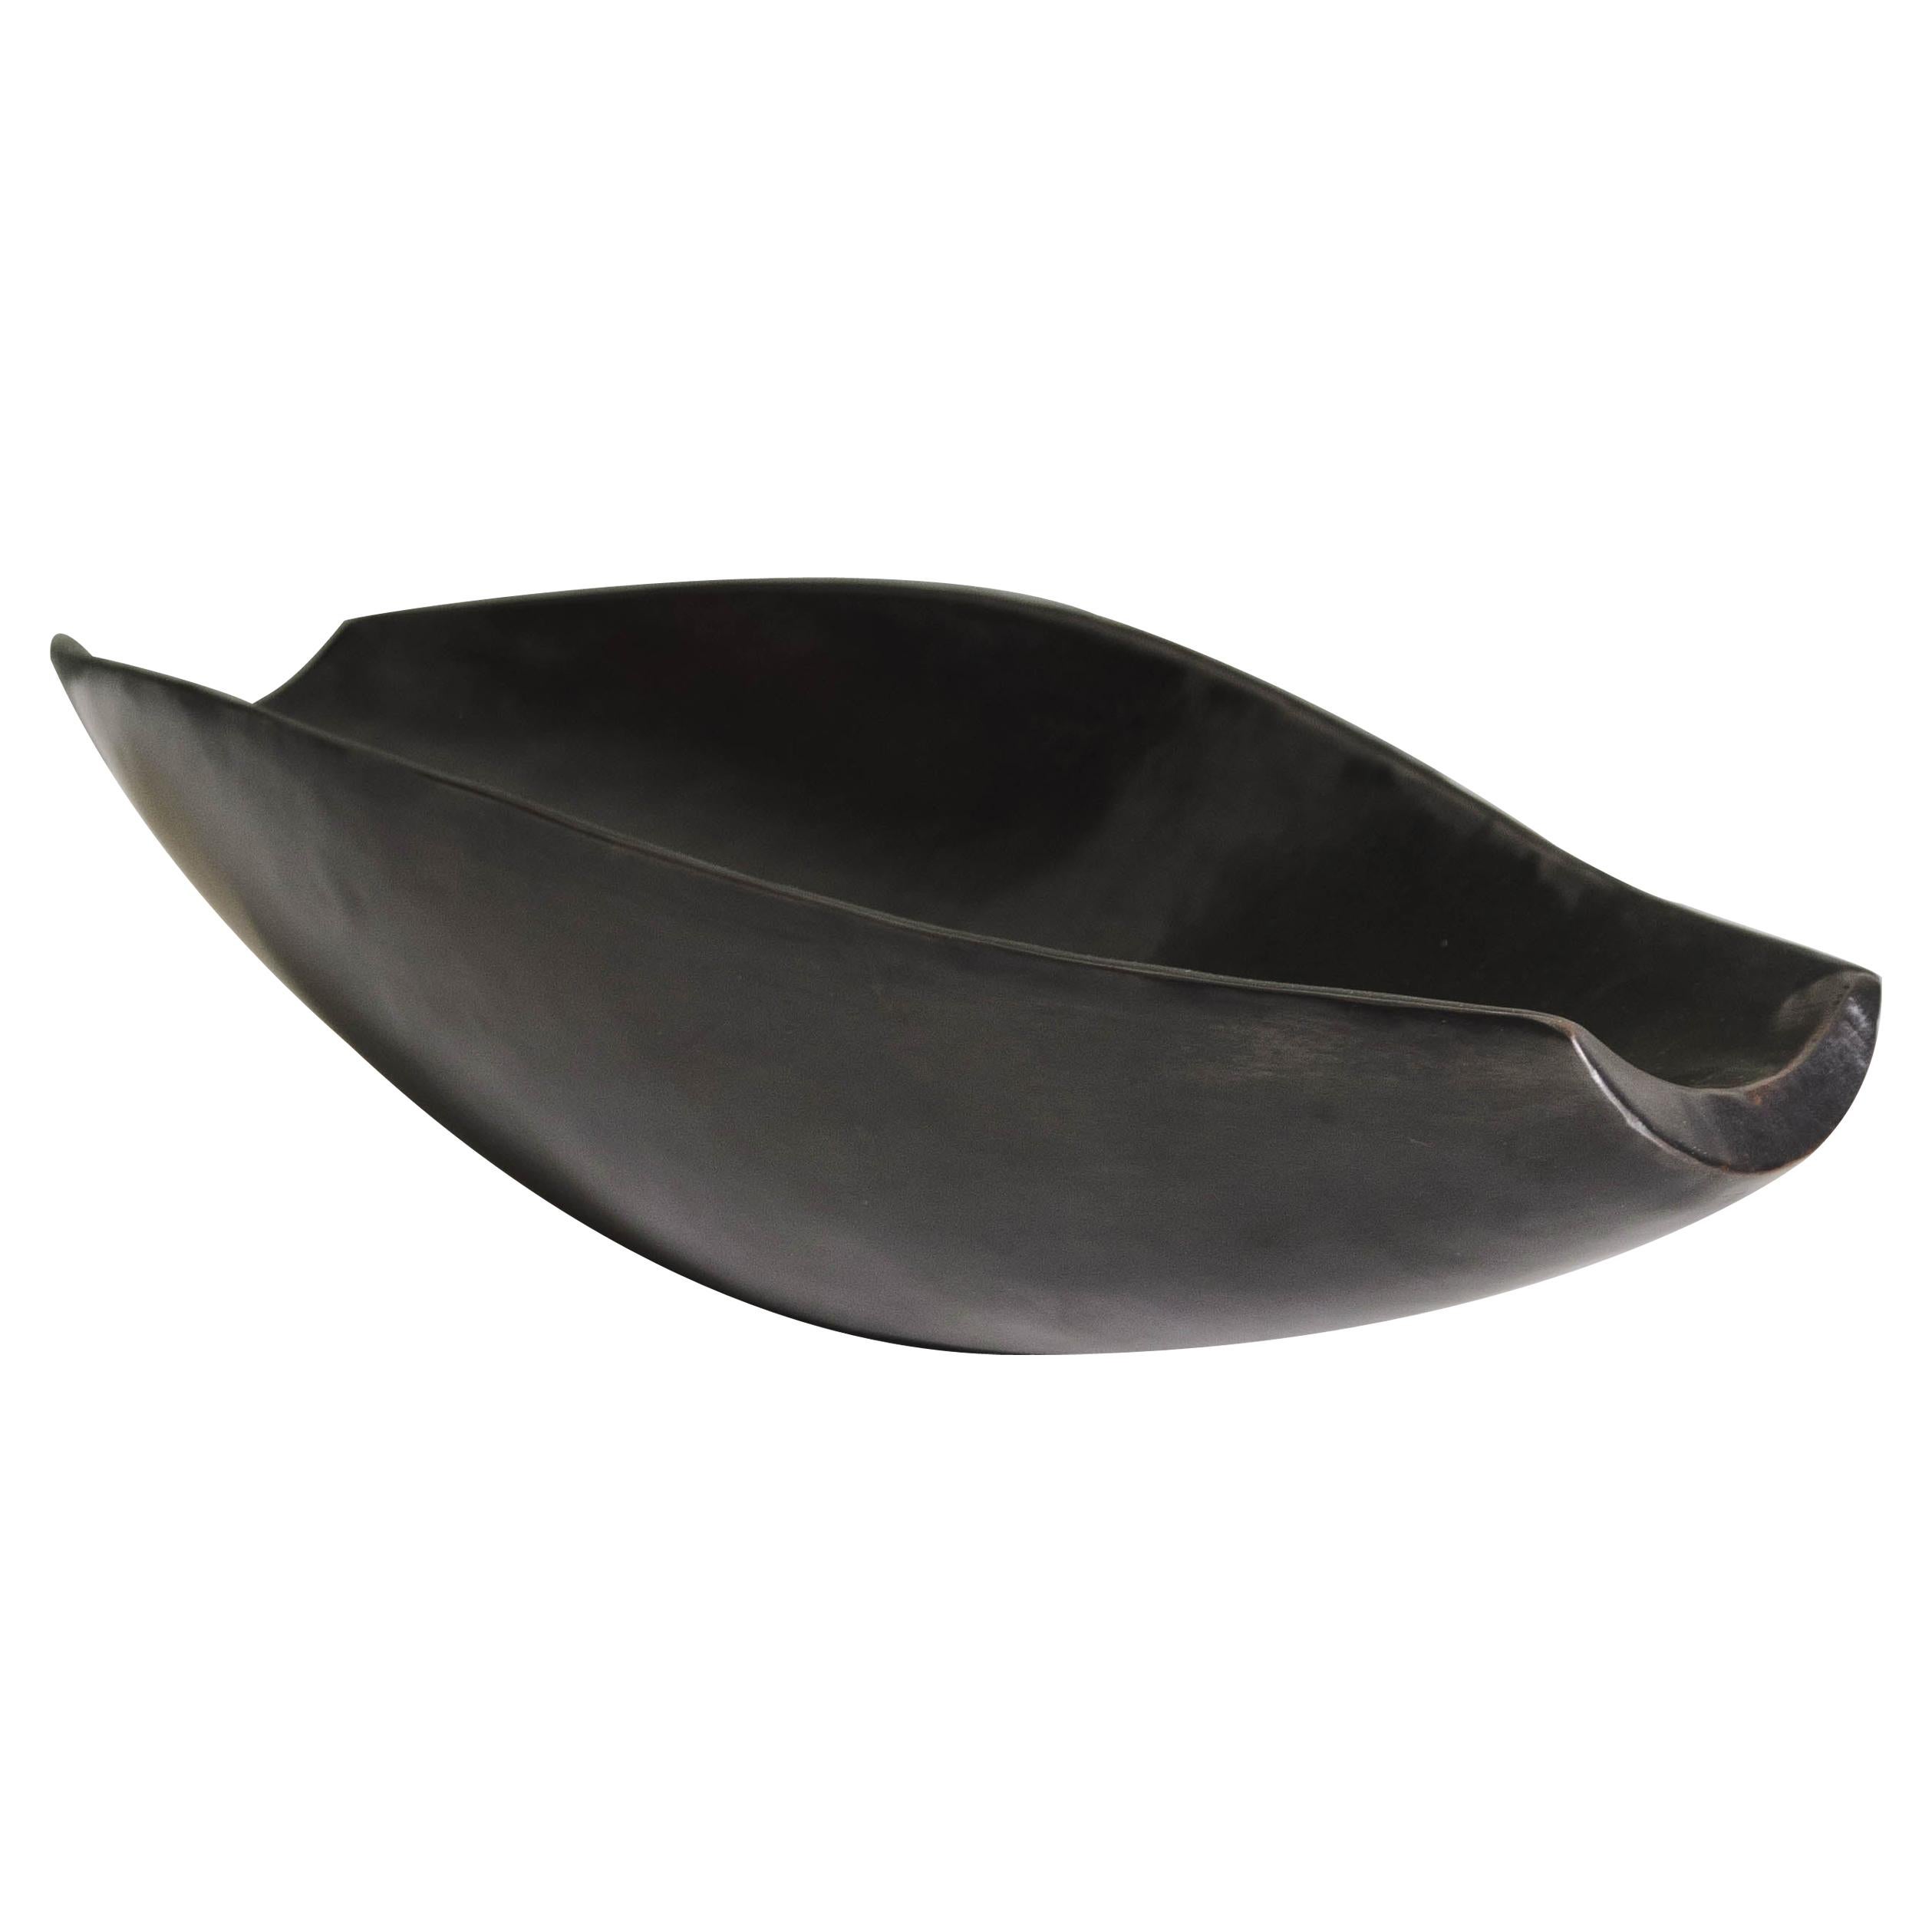 Contemporary Black Copper Bai He Tray by Robert Kuo, Hand Repousse For Sale